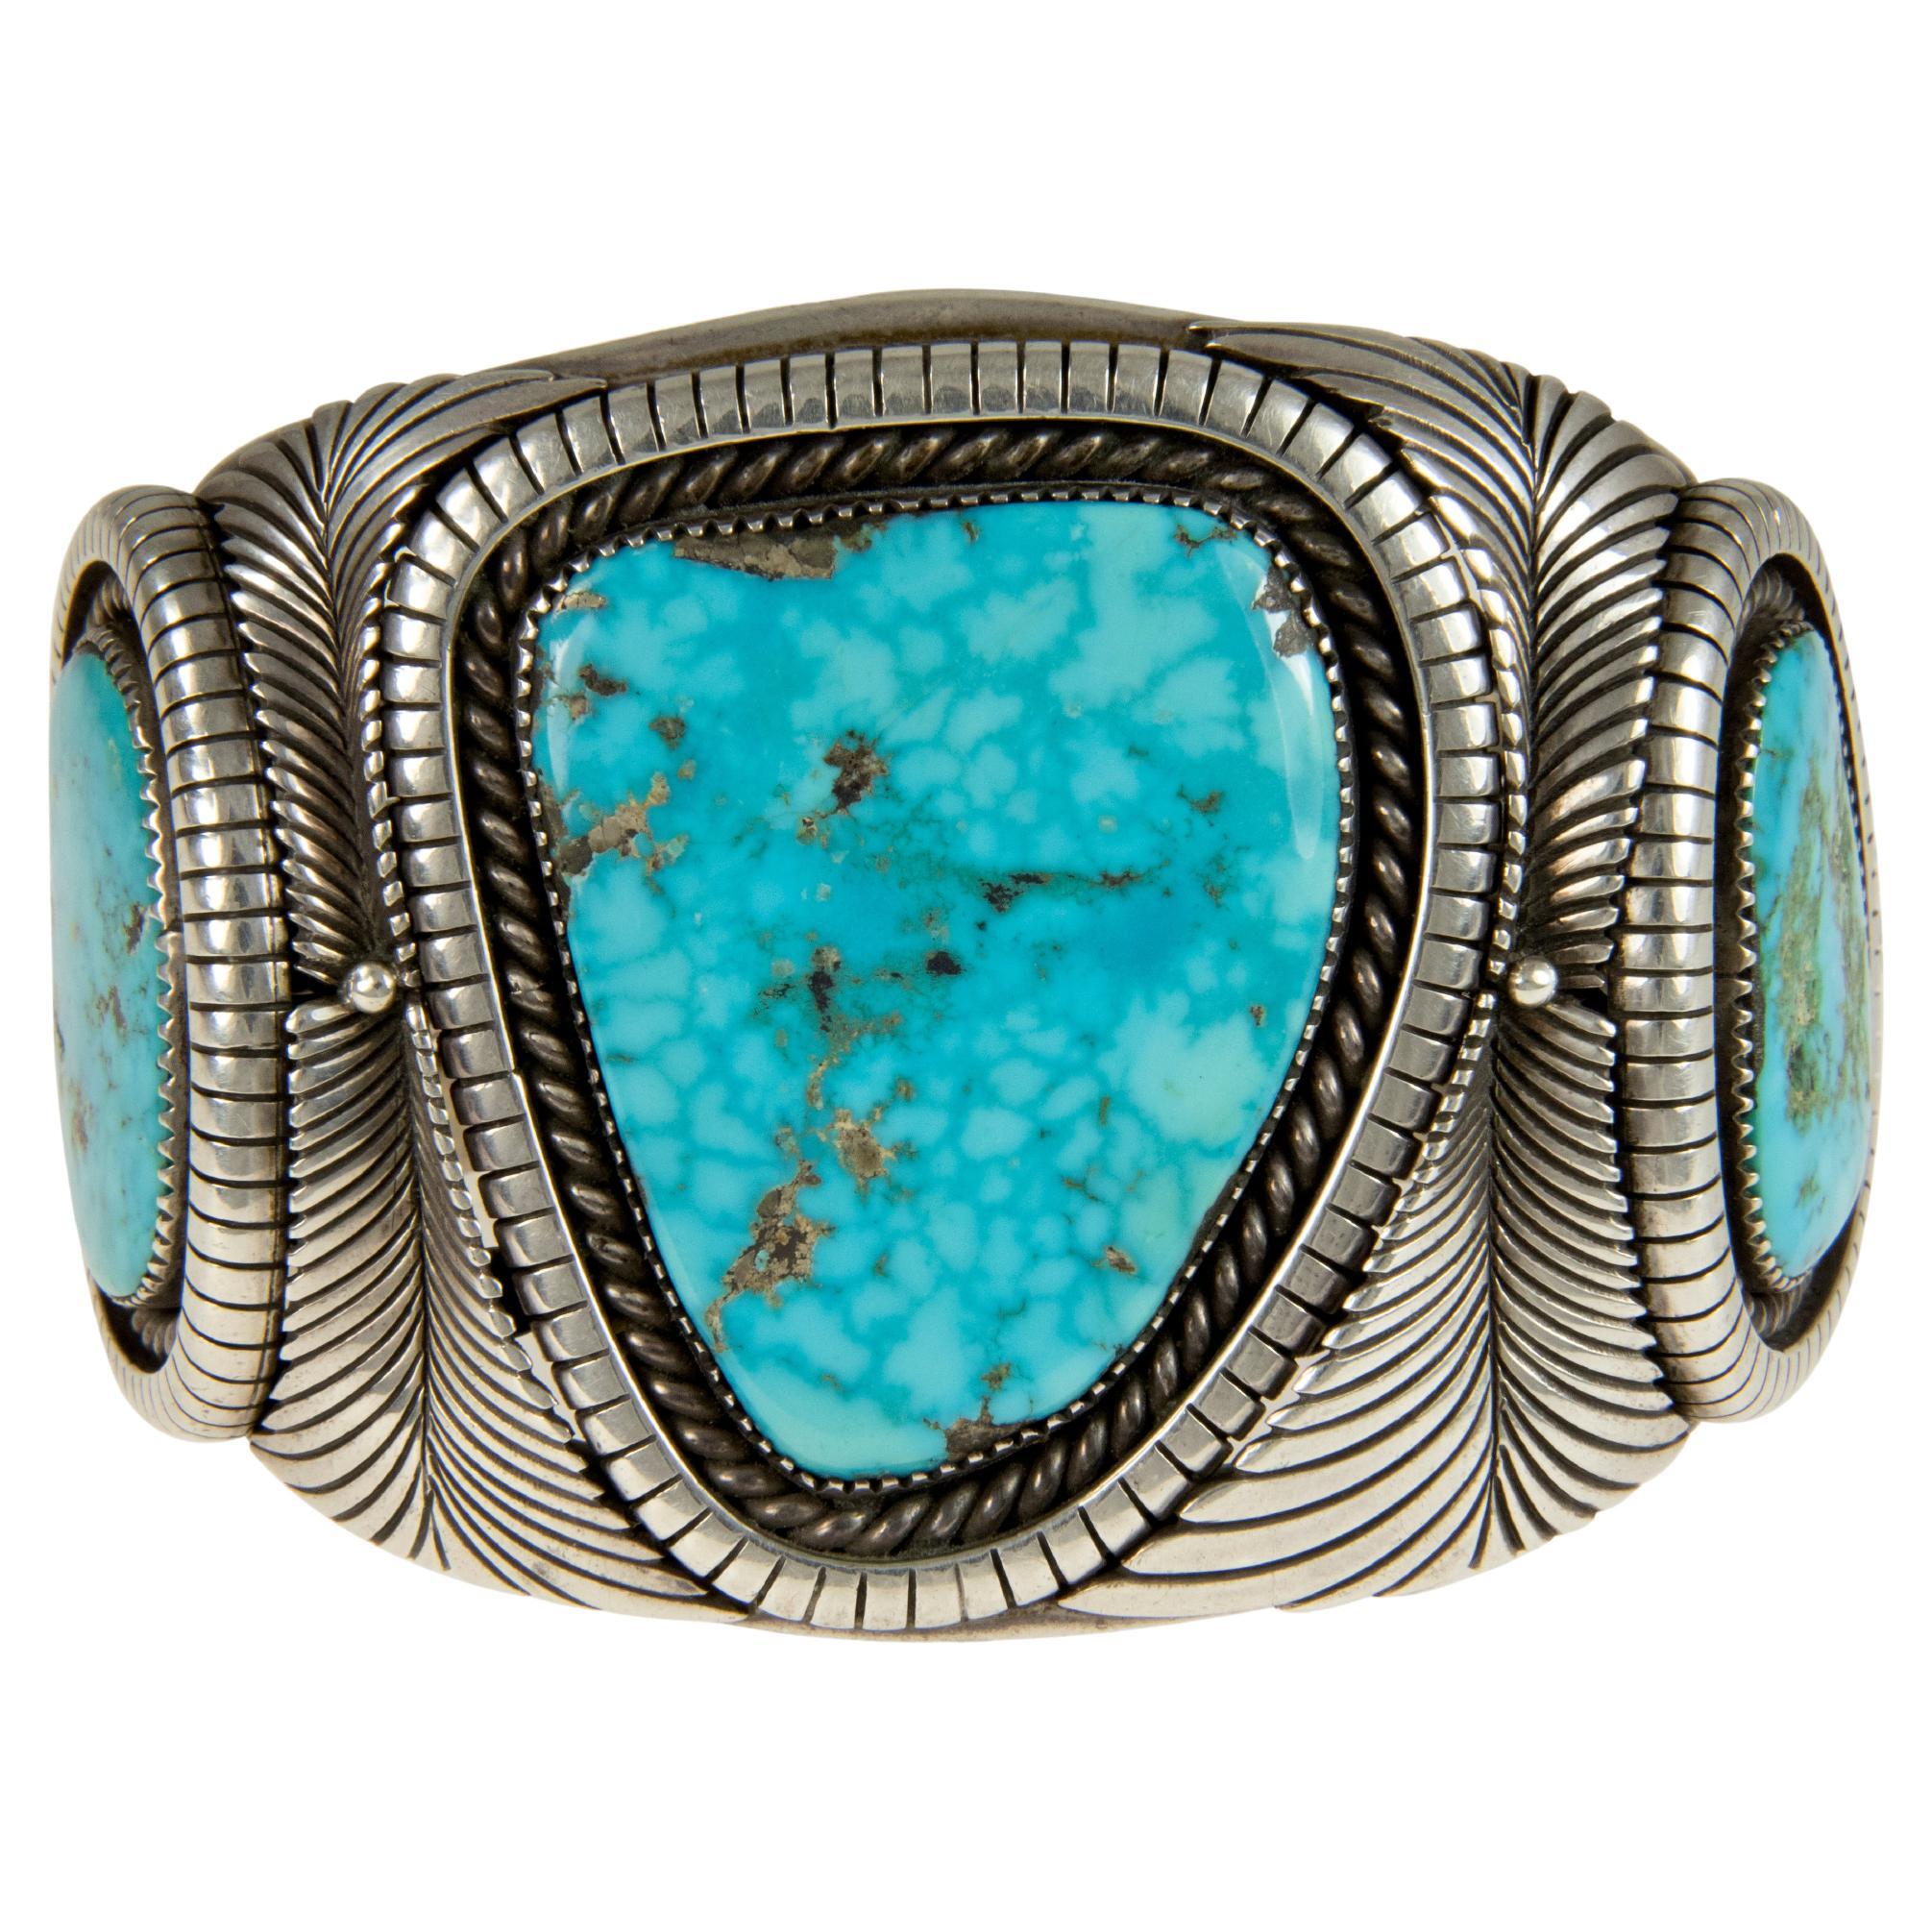 Lee Yazzie Navajo Morenci Turquoise and Sterling Silver Cuff circa 1975